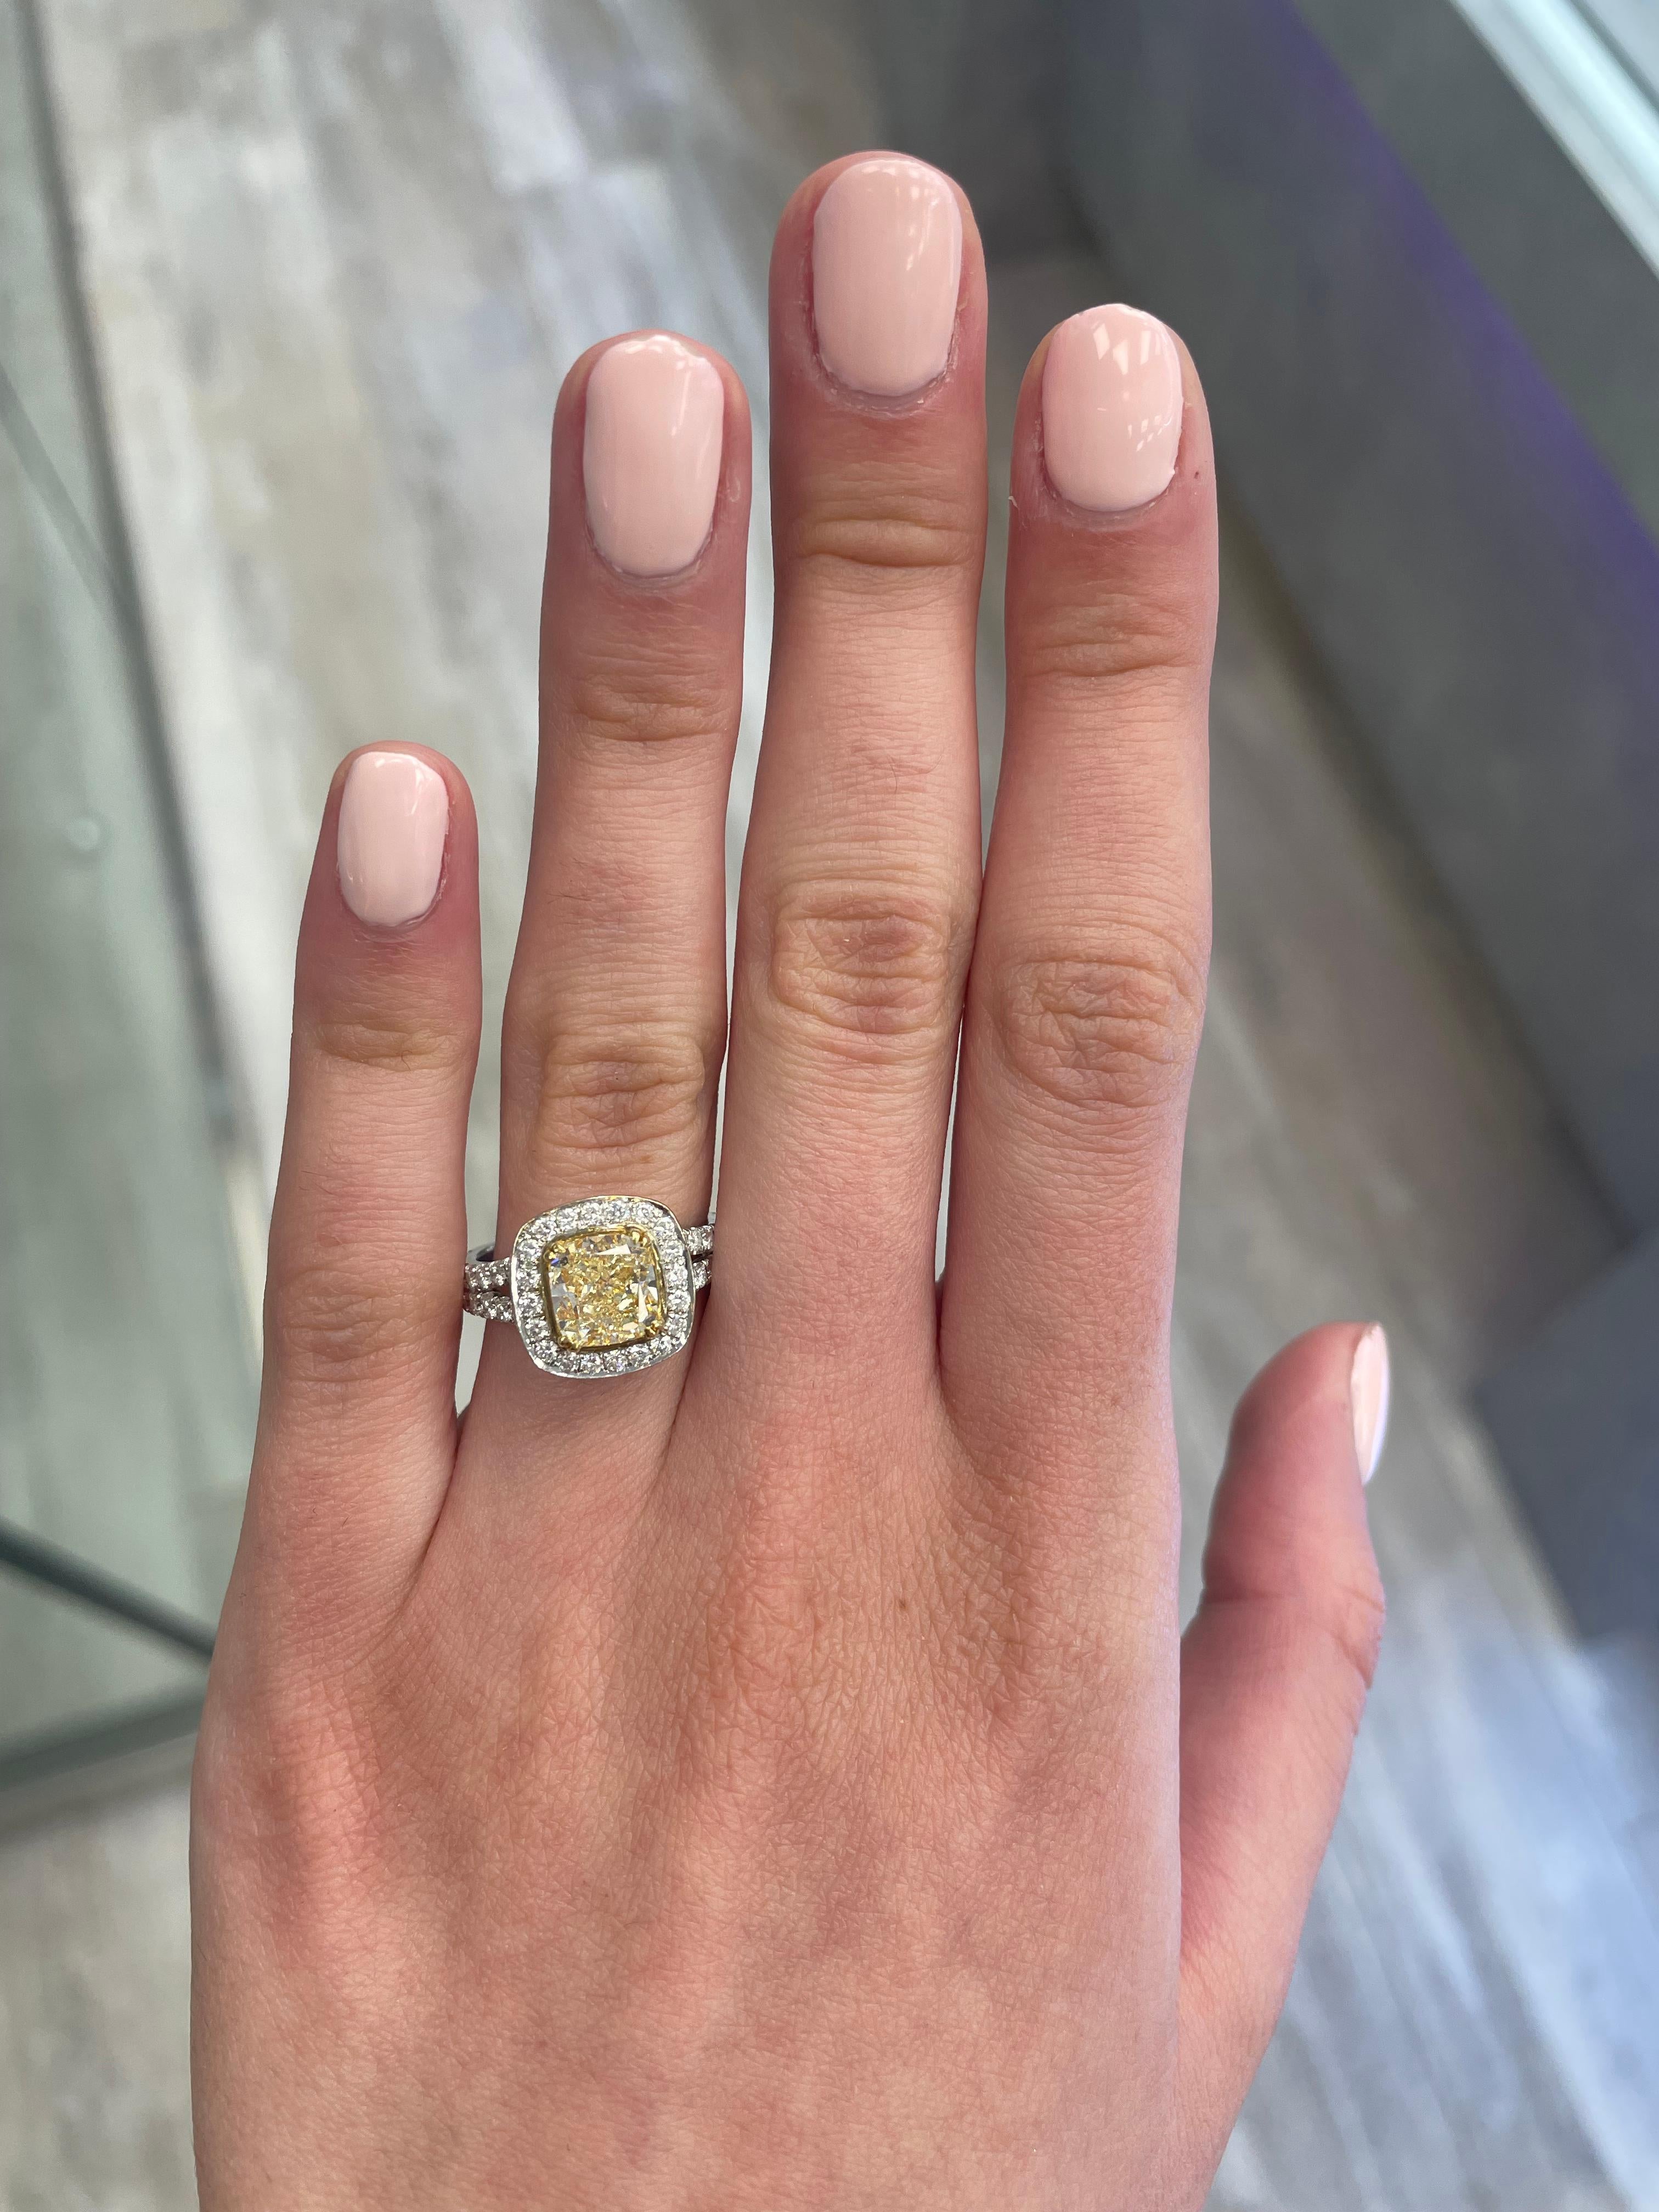 Stunning modern EGL certified yellow diamond with halo ring, two-tone 18k yellow and white gold, split shank. By Alexander Beverly Hills
3.12 carats total diamond weight.
2.11 carat cushion cut Fancy Intense Yellow color and VS1 clarity diamond, EGL